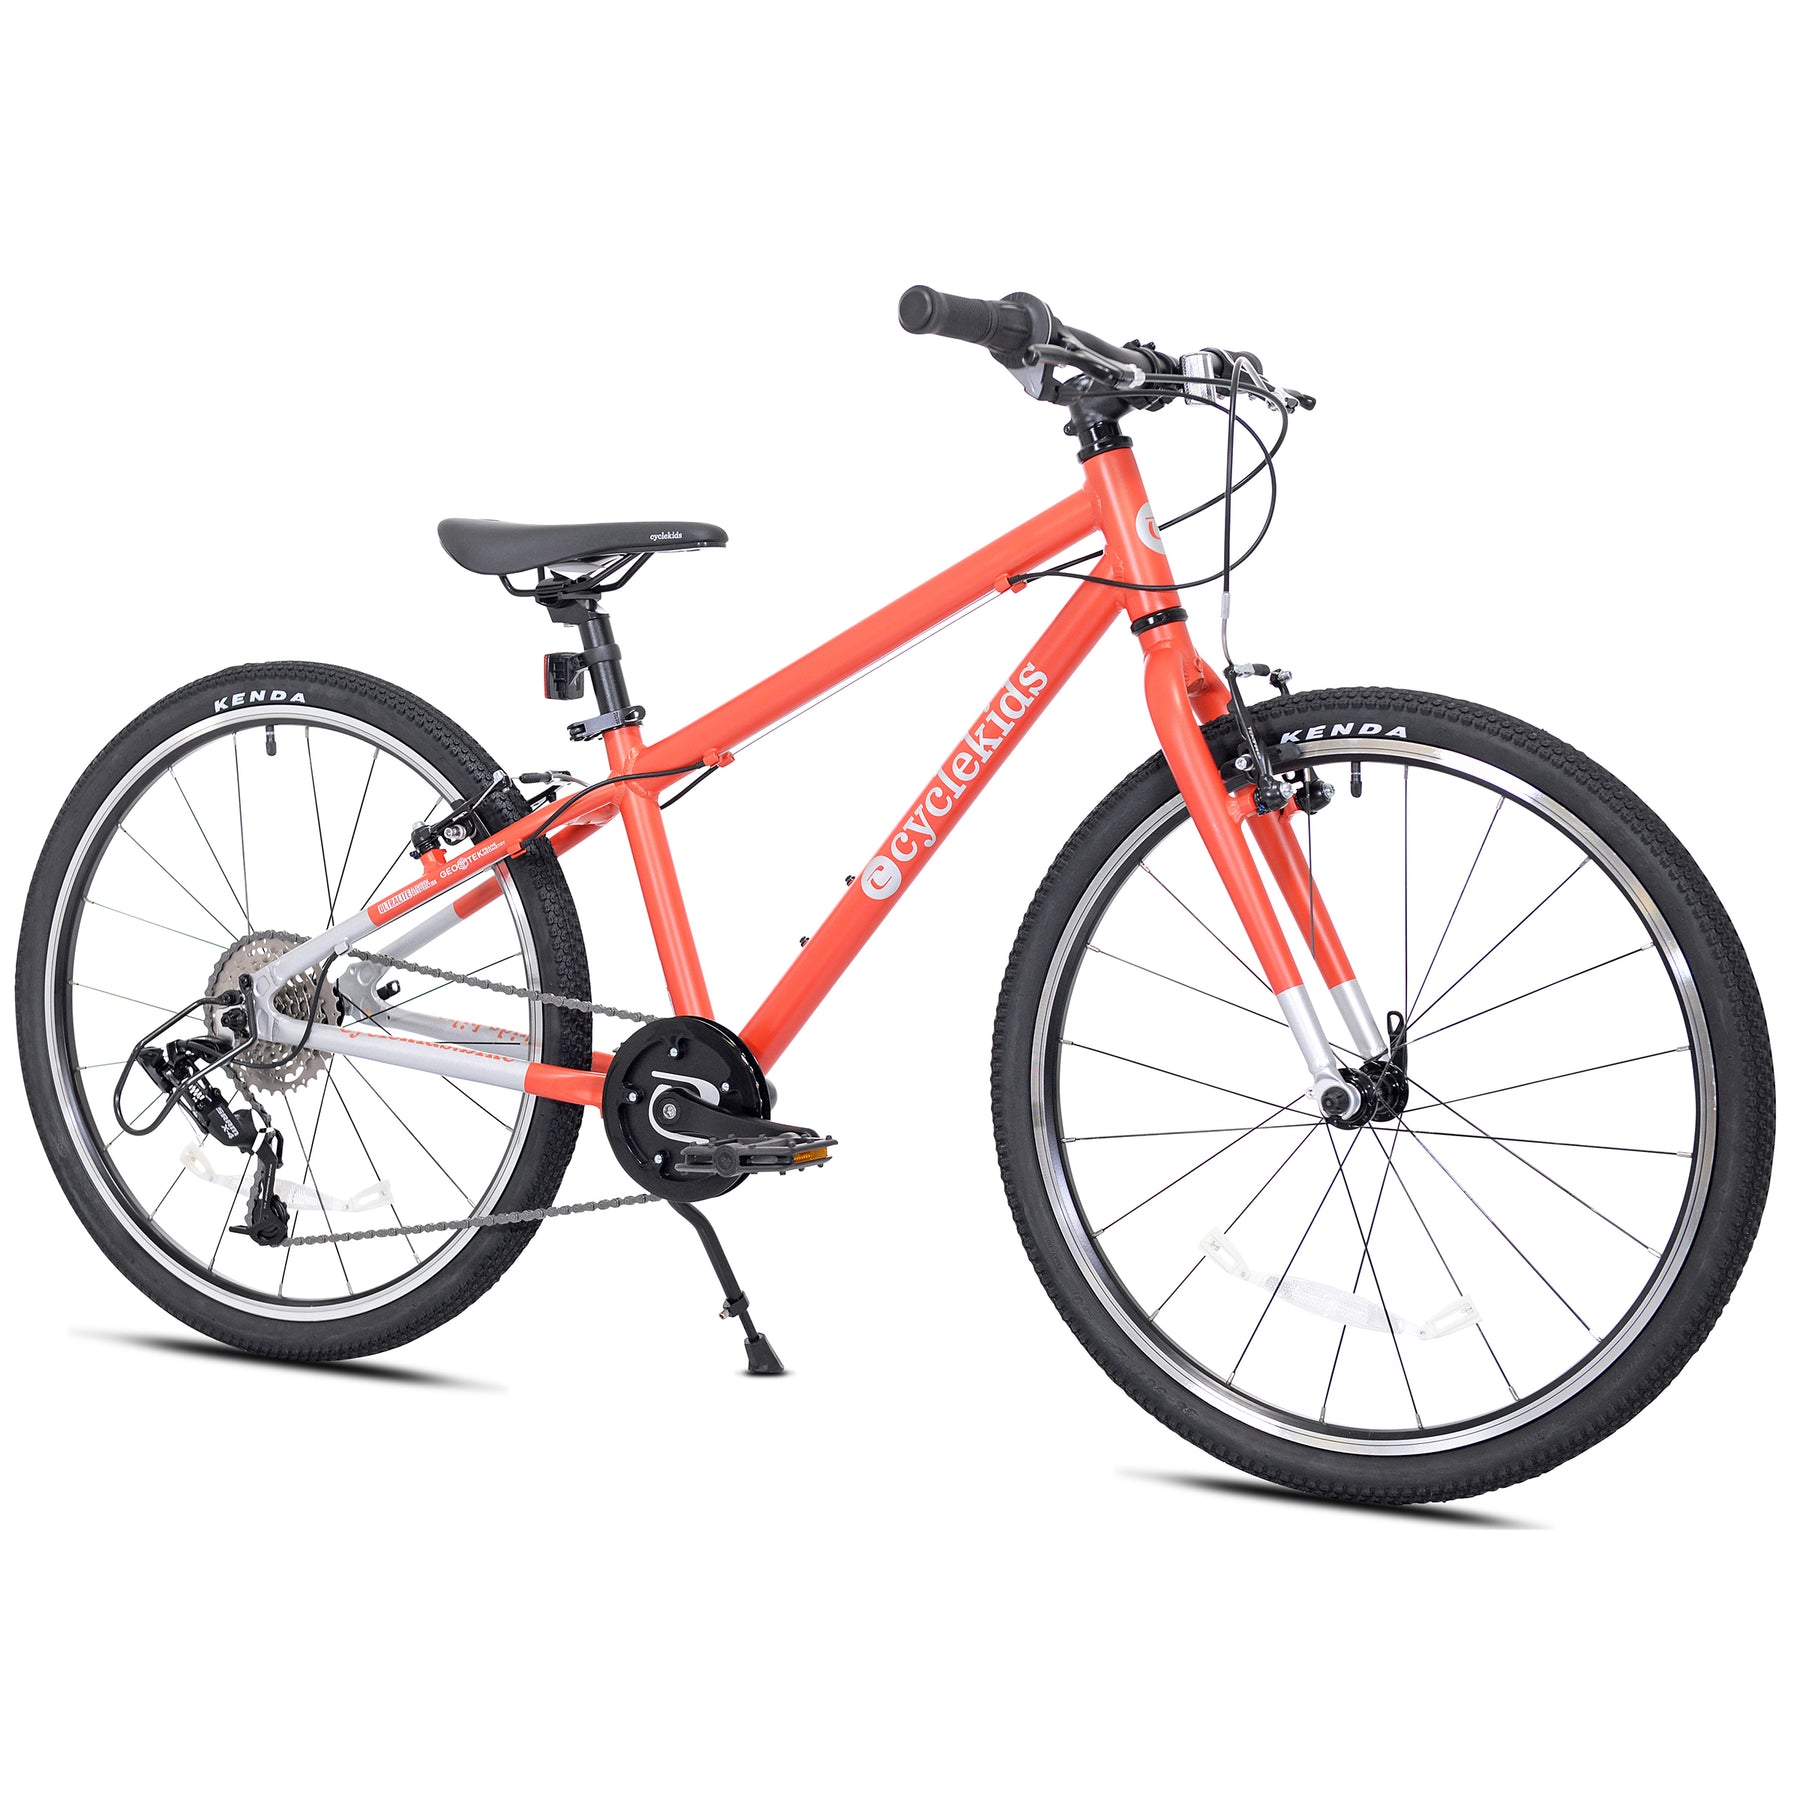 24" CYCLE Kids™ | Mountain Bike for Kids Ages 8+